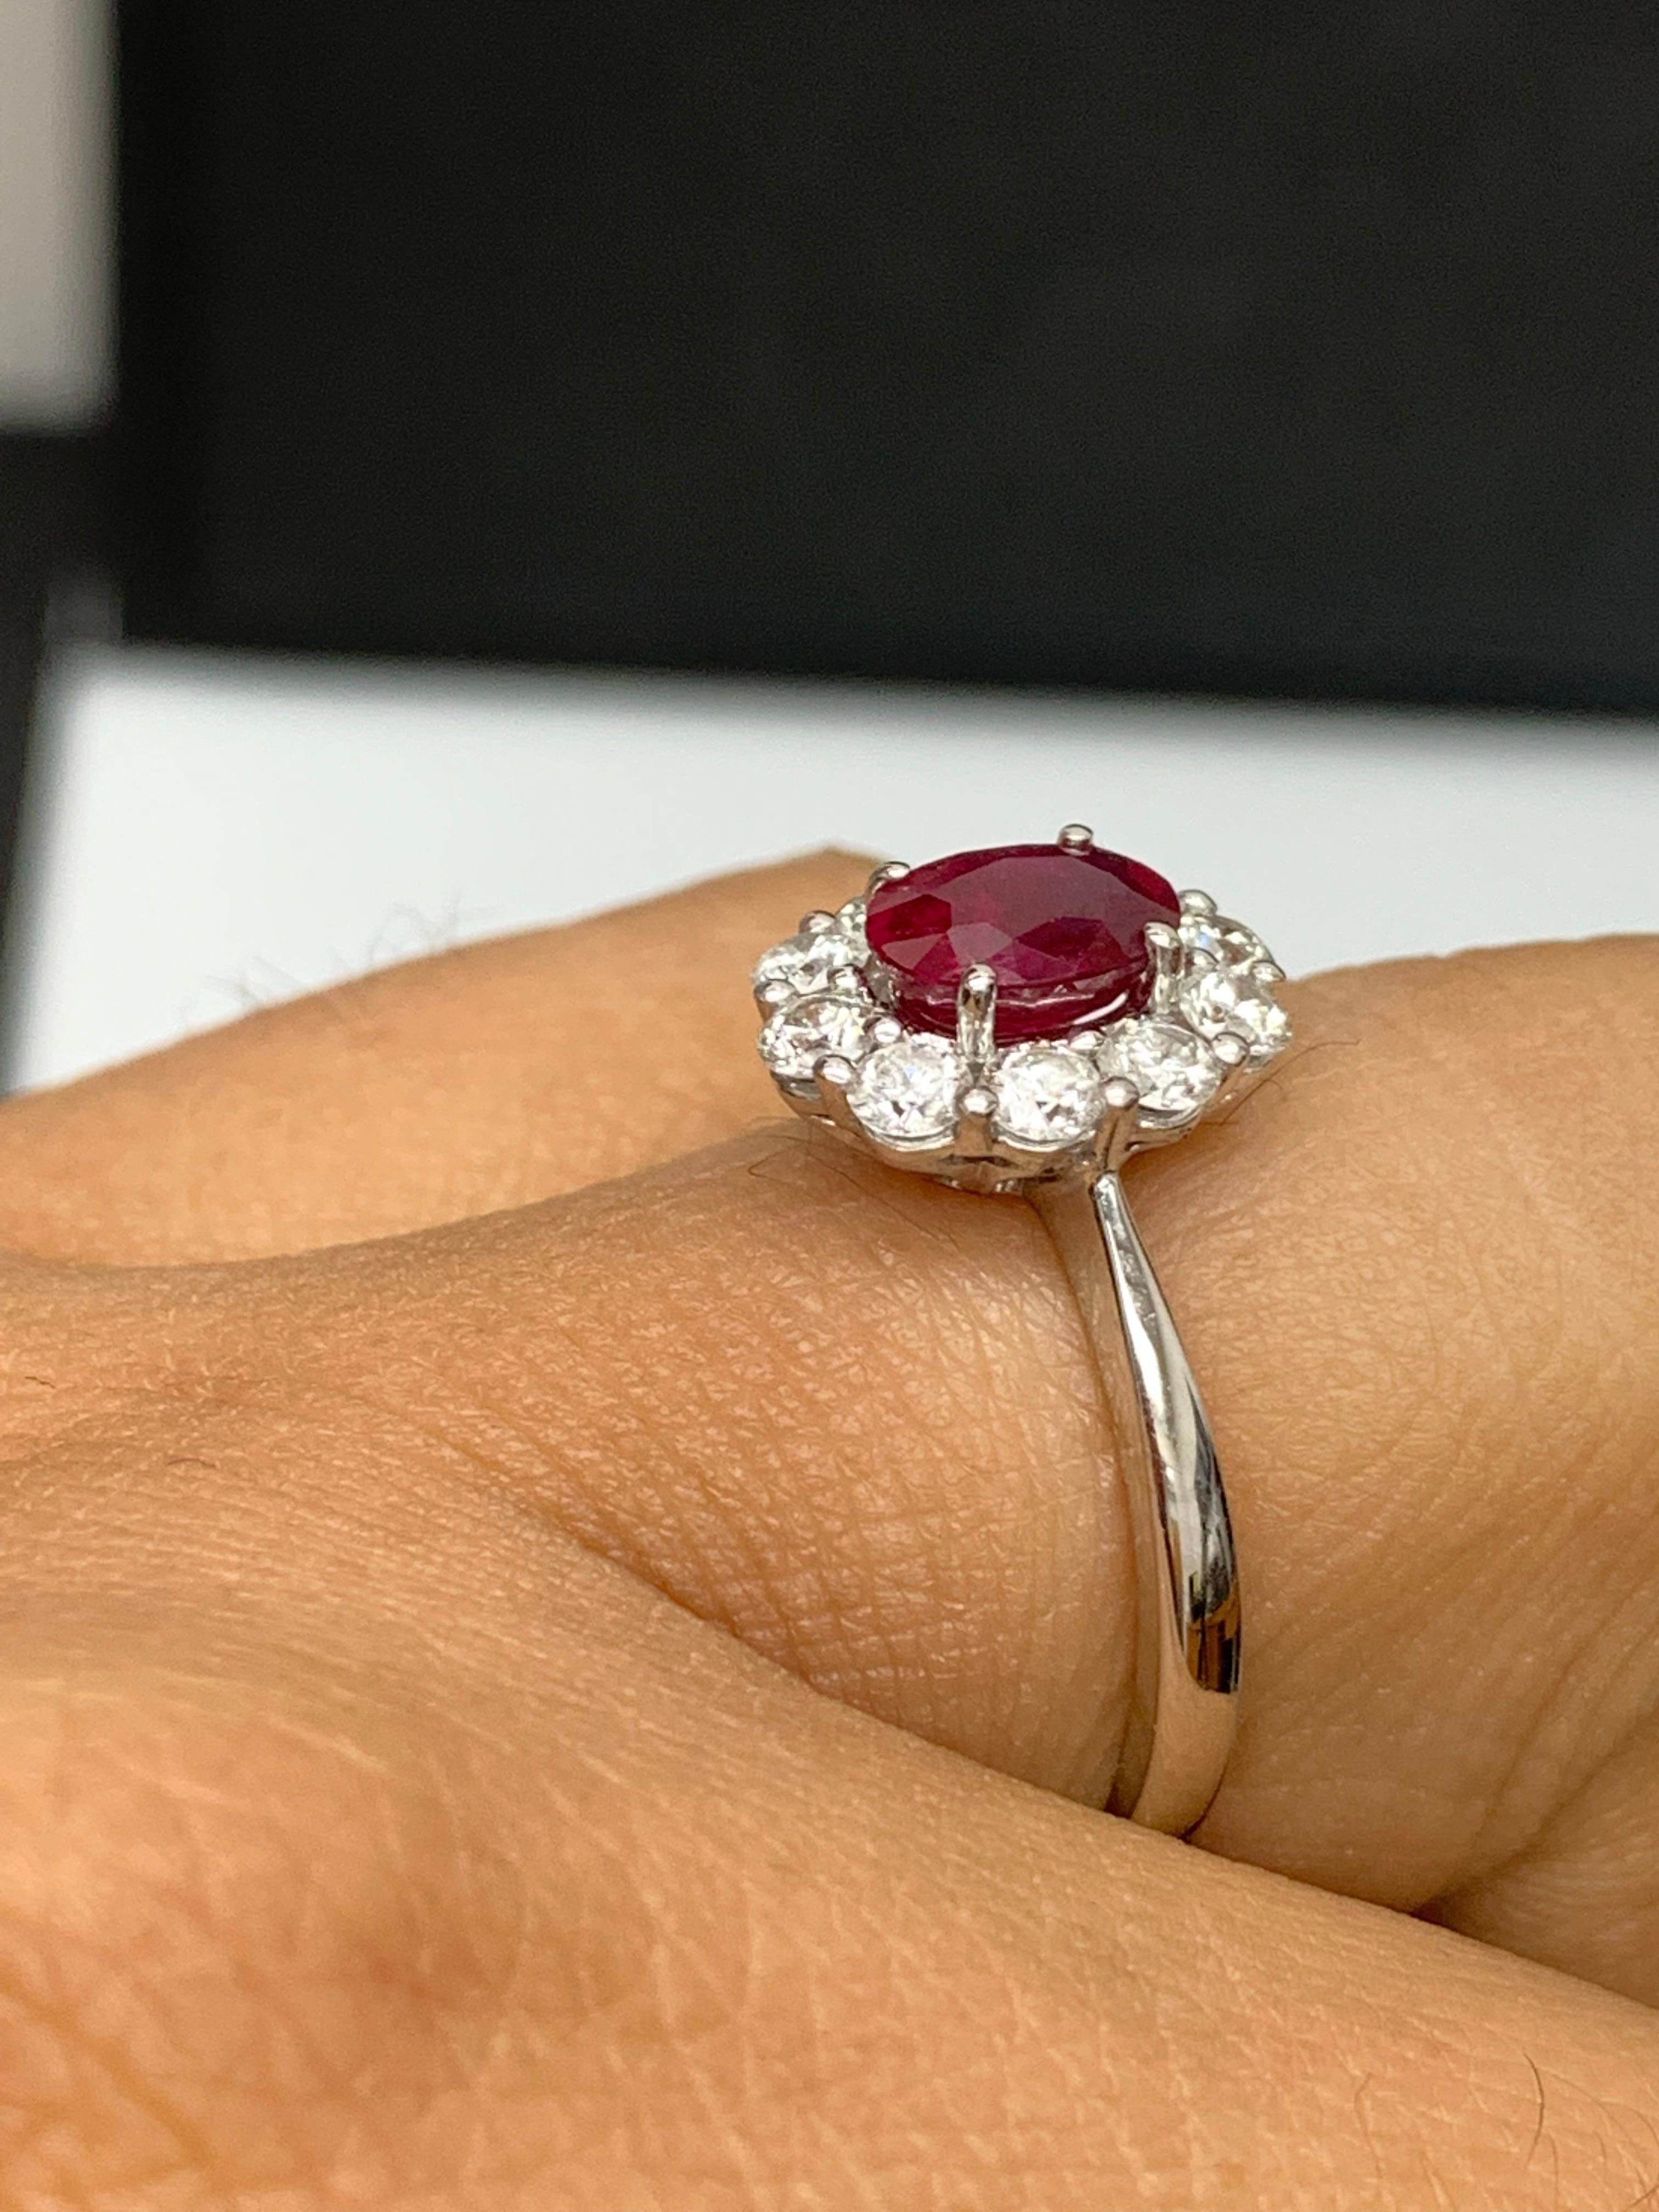 0.92 Carat Oval Cut Ruby and Diamond Ring in 18k White Gold For Sale 1